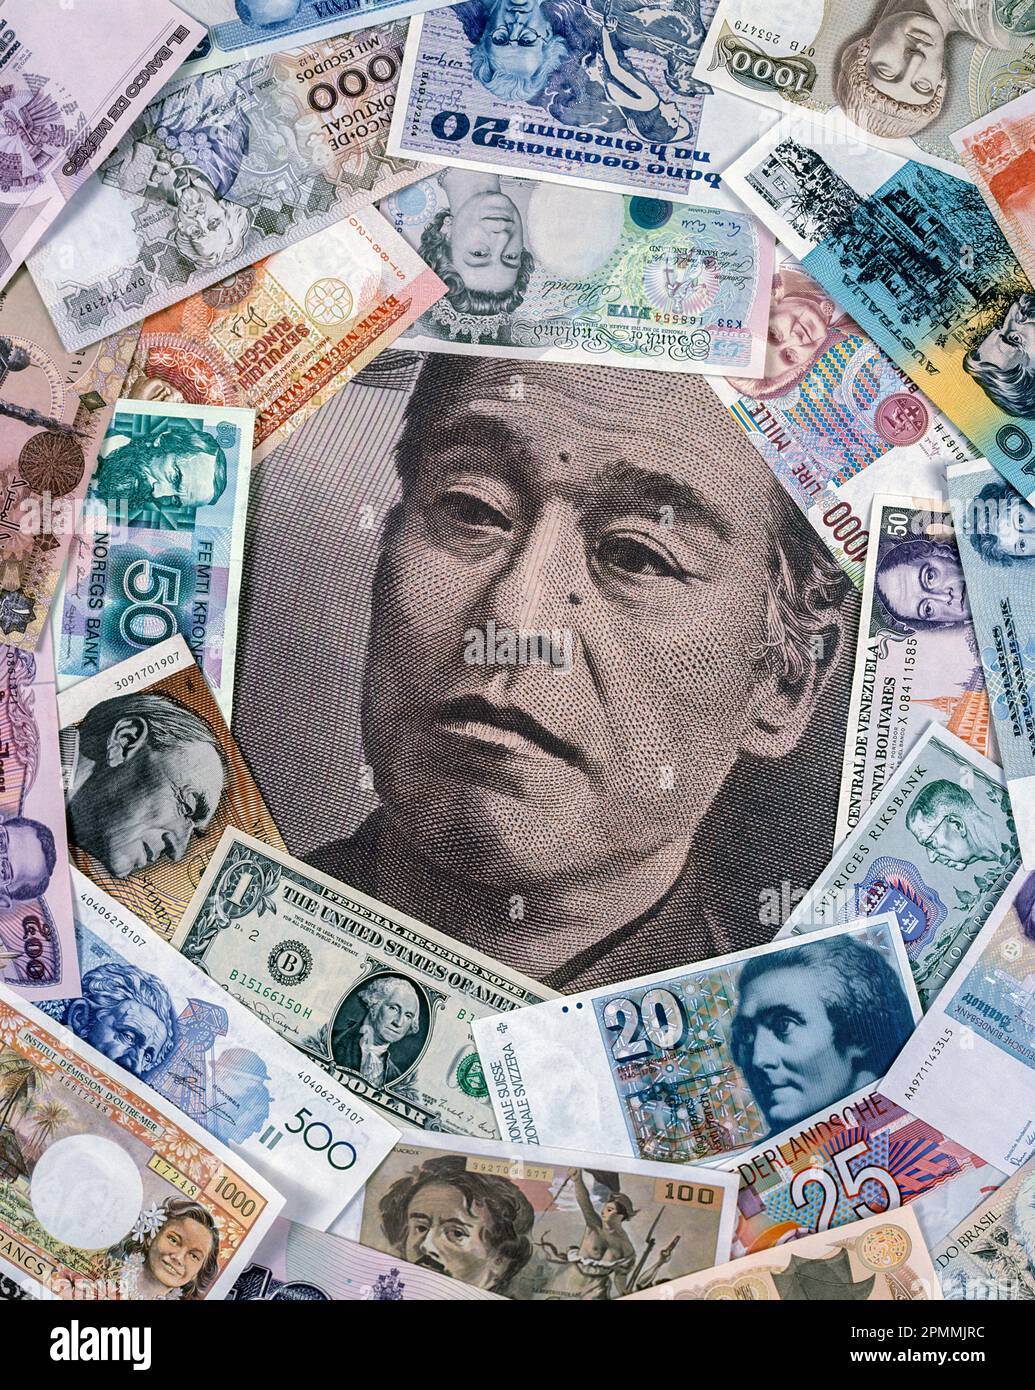 1991 HISTORICAL GIANT JAPANESE 10000 YEN BANK NOTE ENCIRCLED BY NATIONAL BANK NOTES Stock Photo